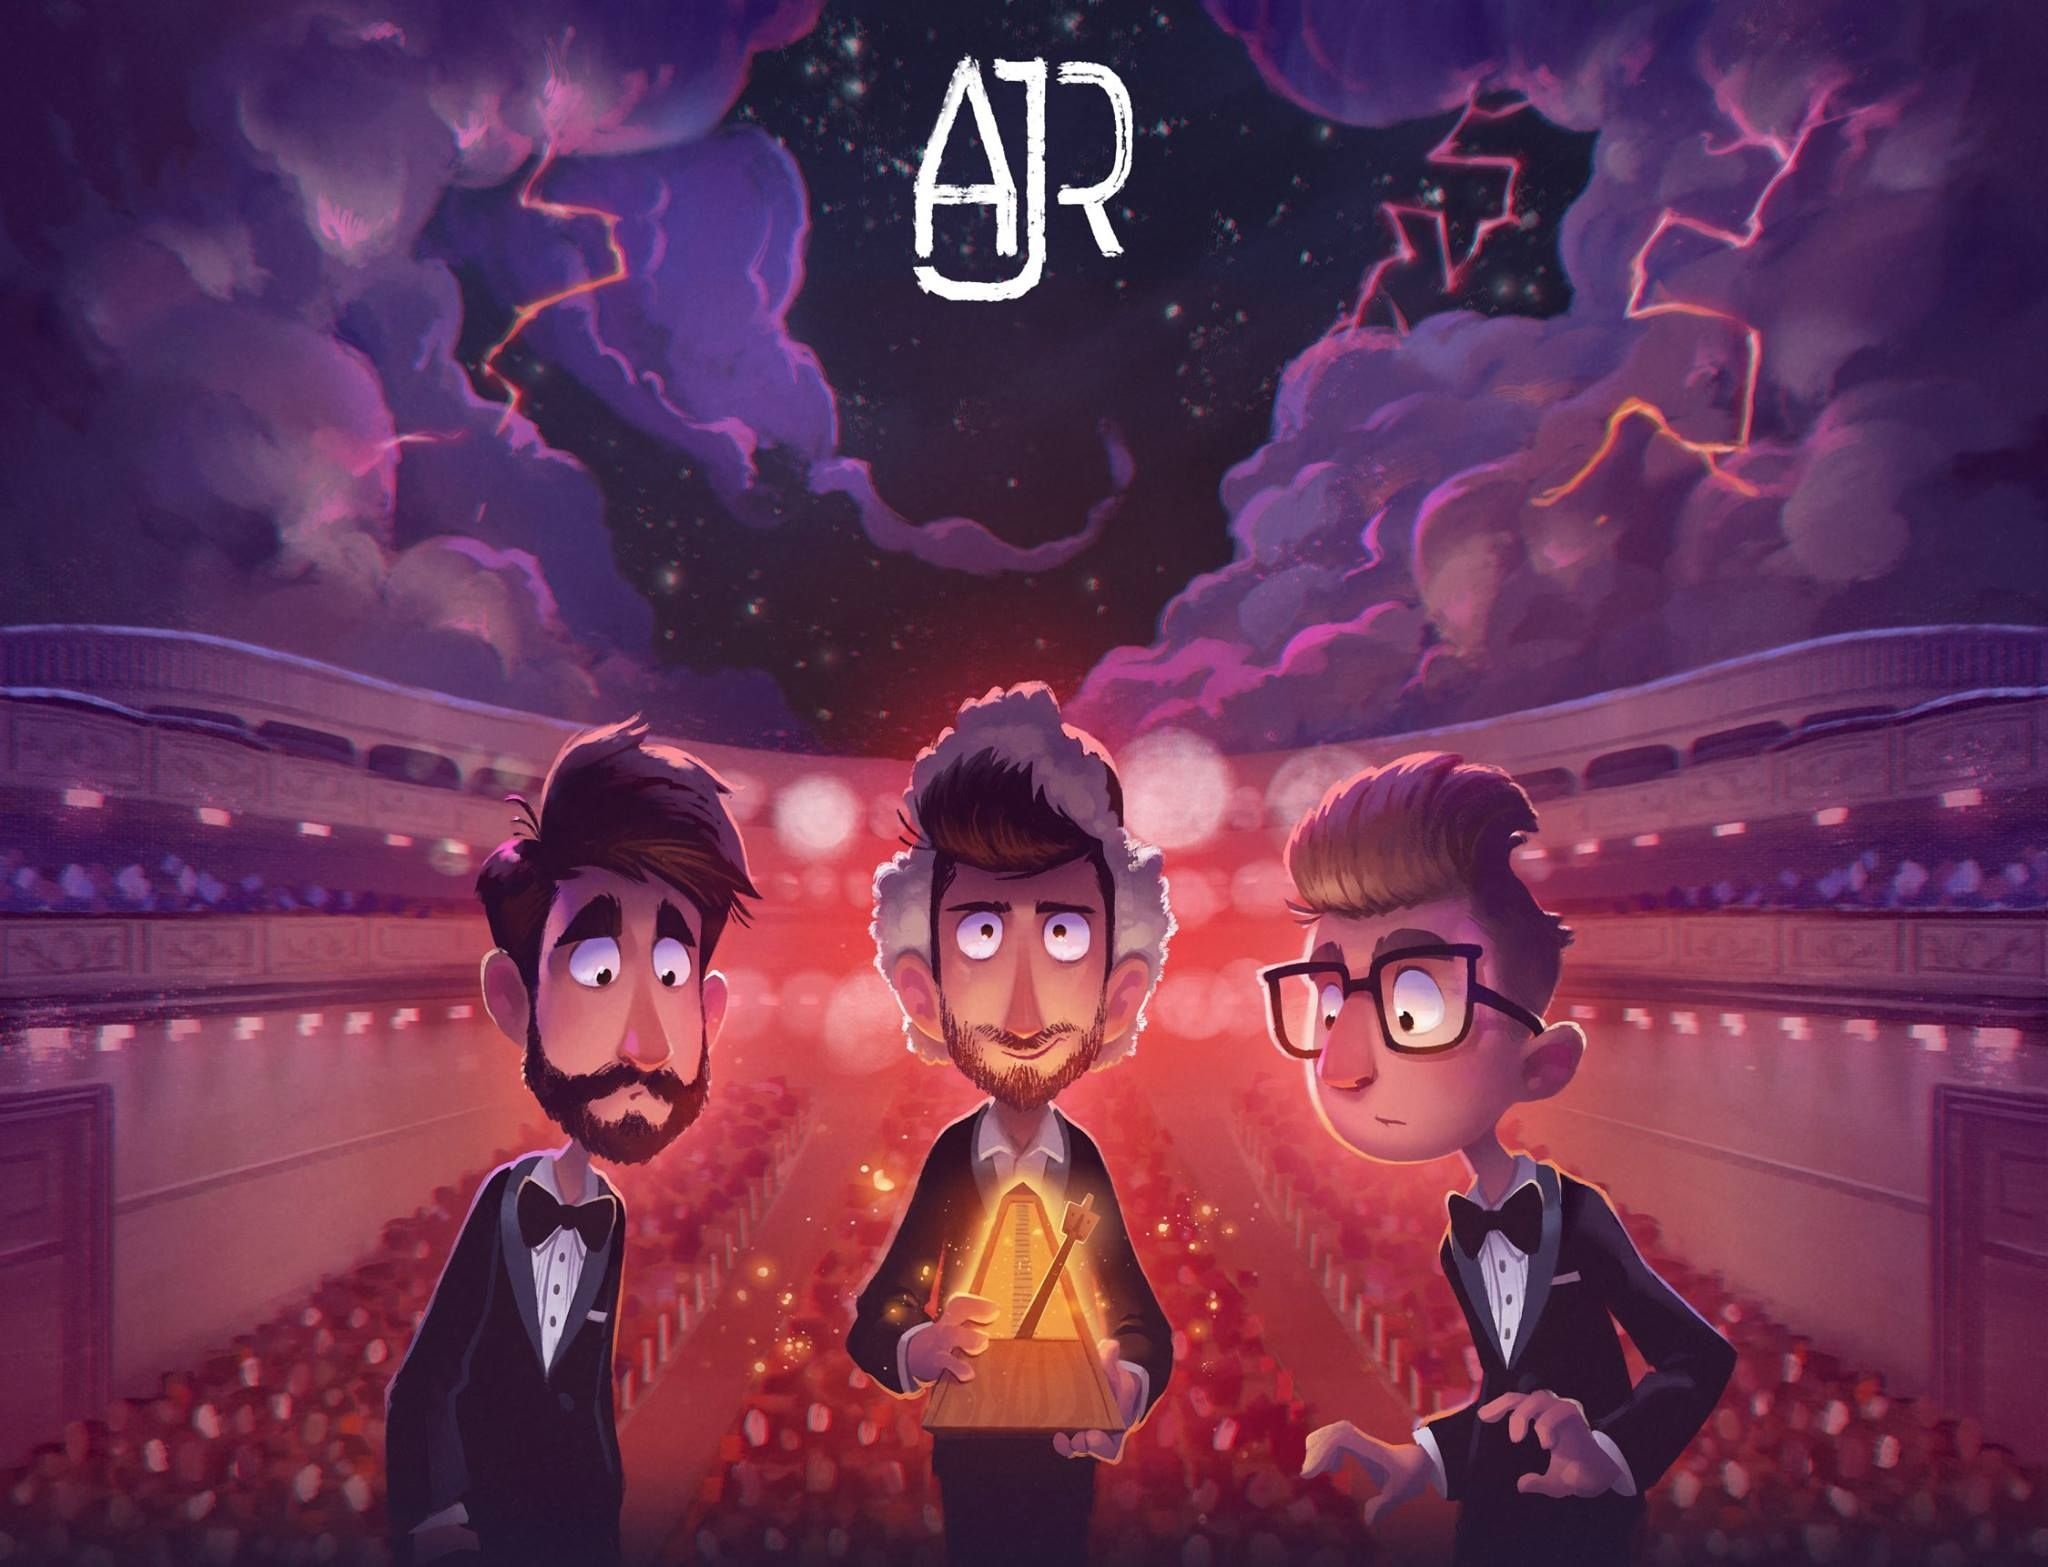 AJR phone wallpapers, Unique designs, Personalization option, Share with friends, 2050x1570 HD Desktop